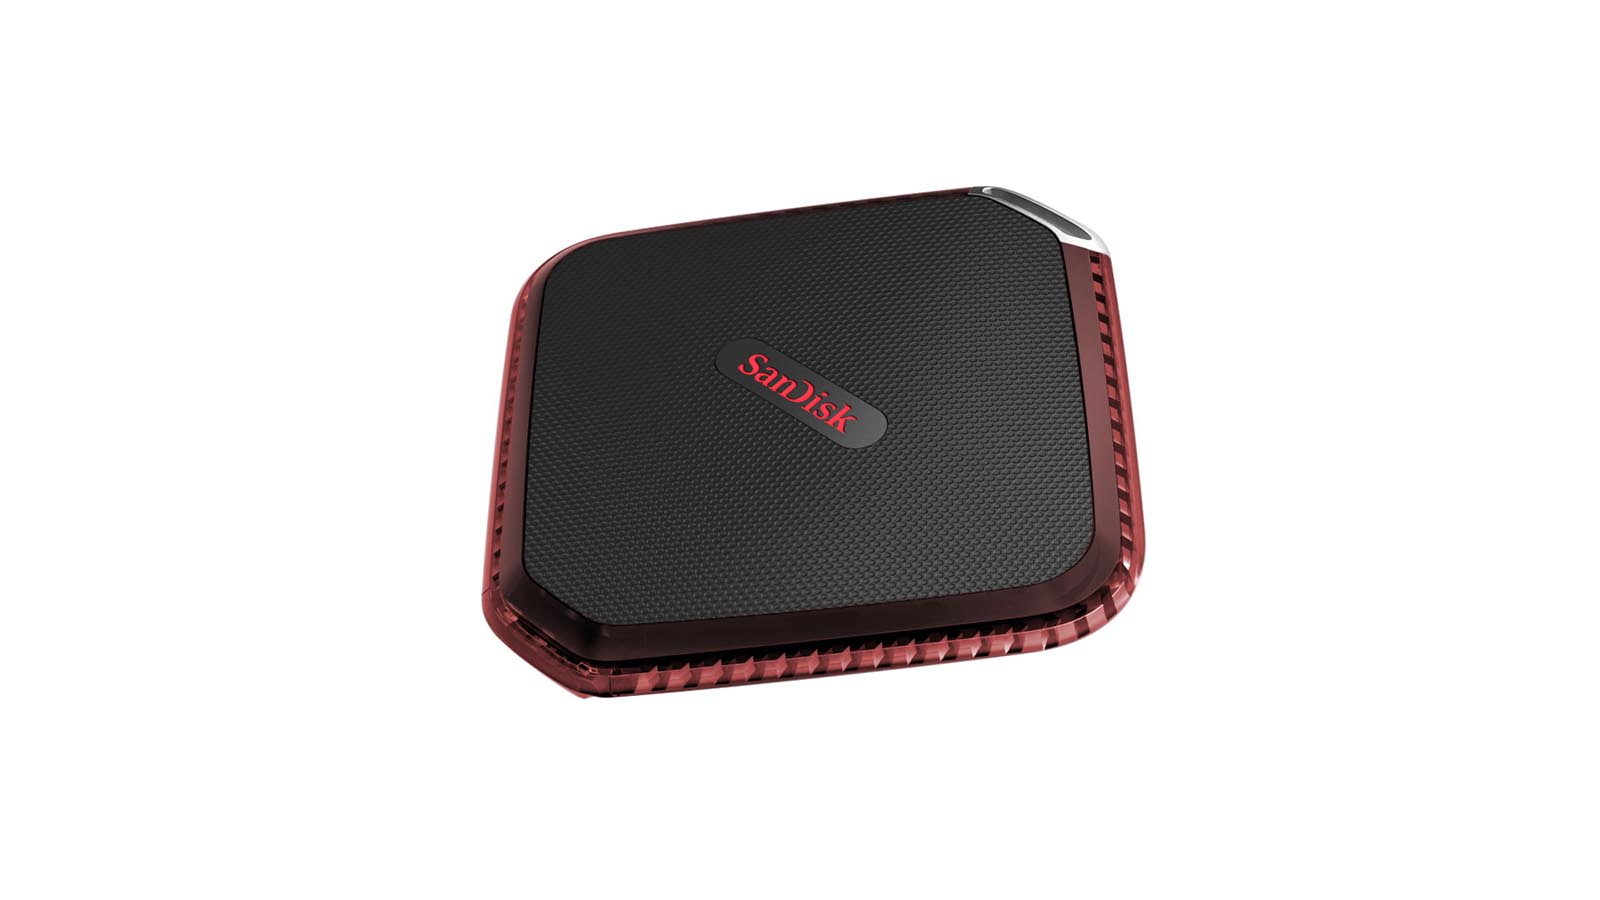 Product: SanDisk Extreme 510 Portable SSD